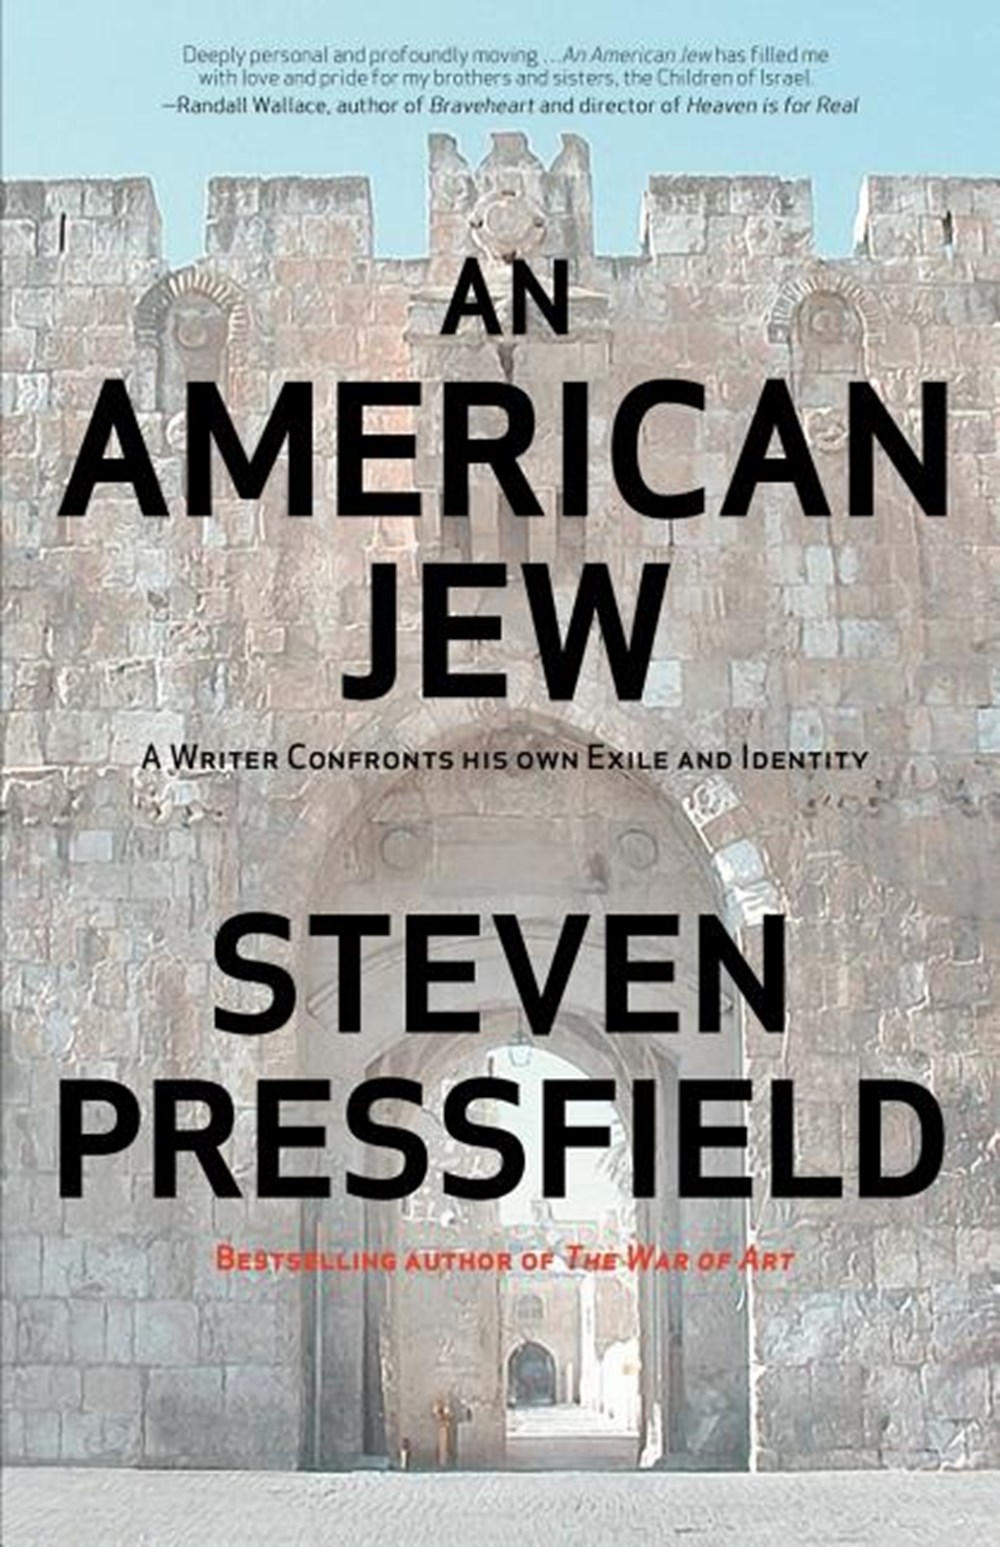 American Jew: A Writer Confronts His Own Exile and Identity